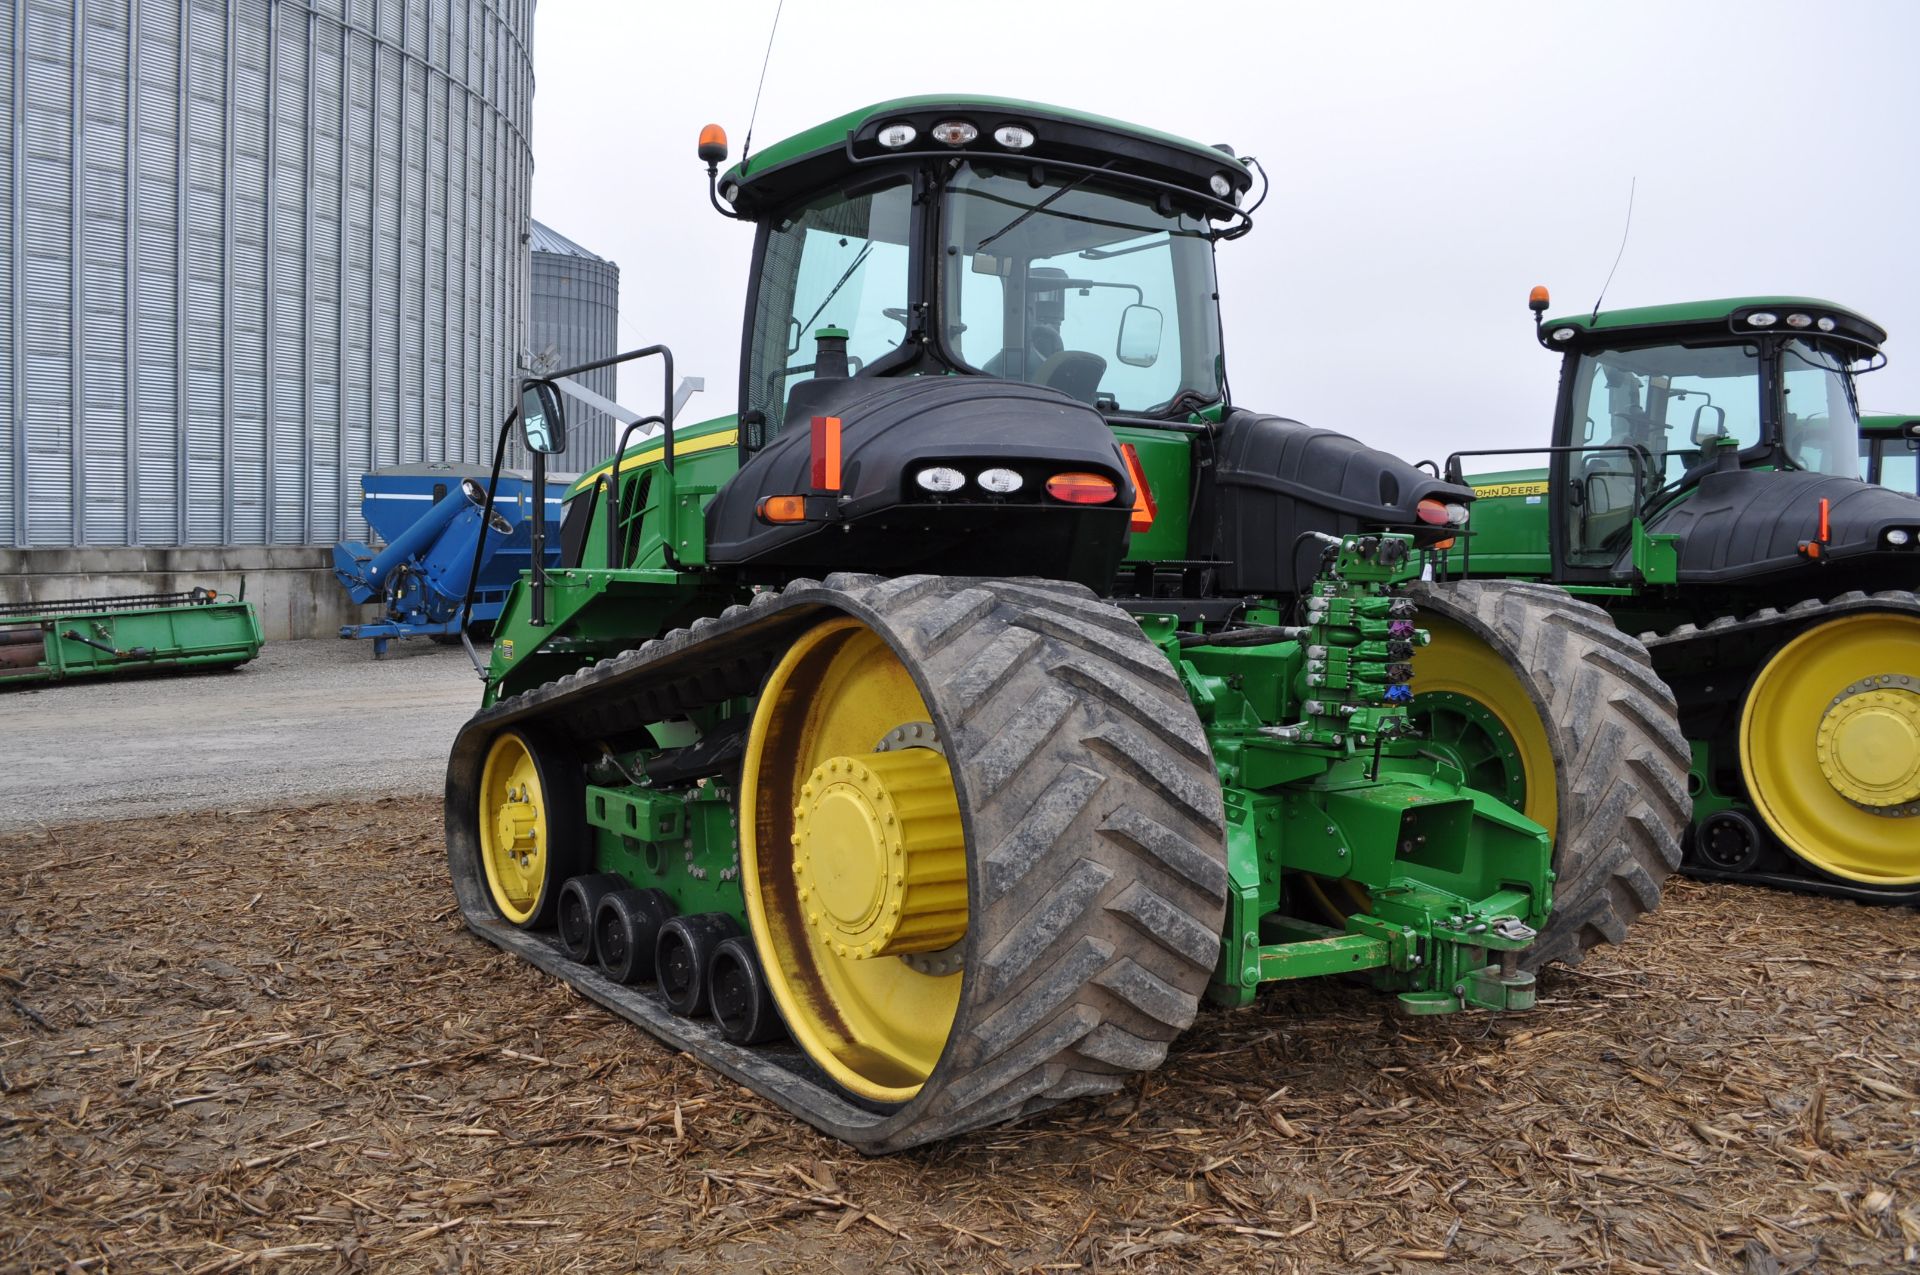 John Deere 9510RT track tractor, 36” belts, front weights, Powershift, 6 hyd remotes, 1000 PTO - Image 4 of 37